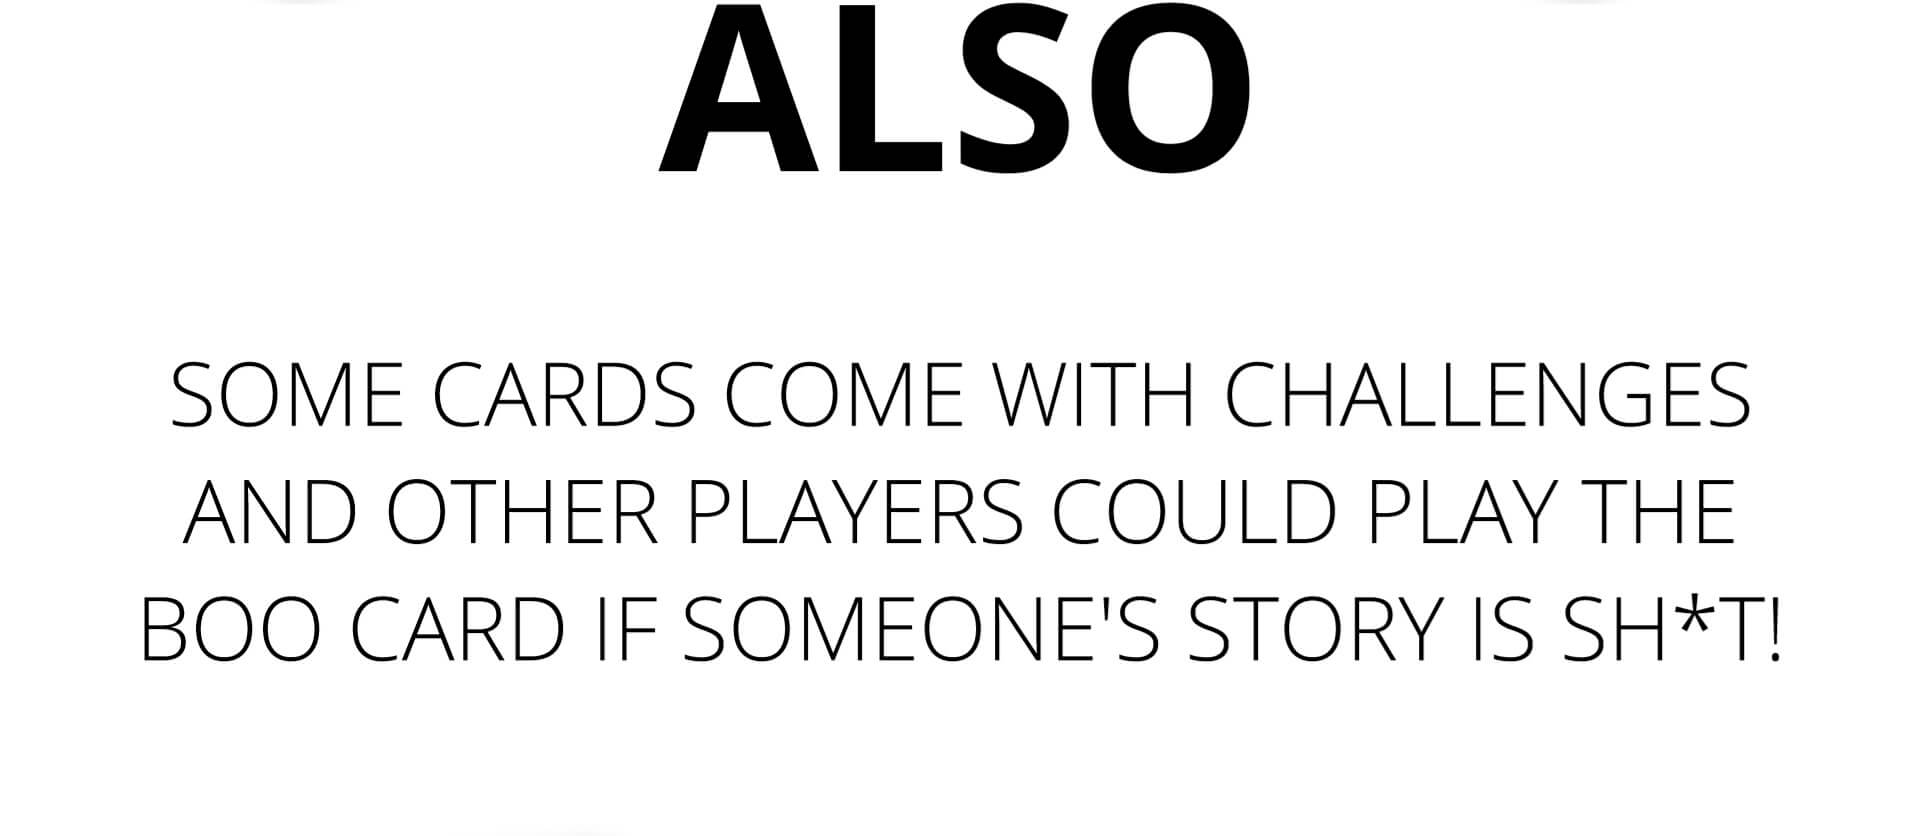 Also - Some cards come with challenged and other players could play the Boo card if someone's story is sh*t!